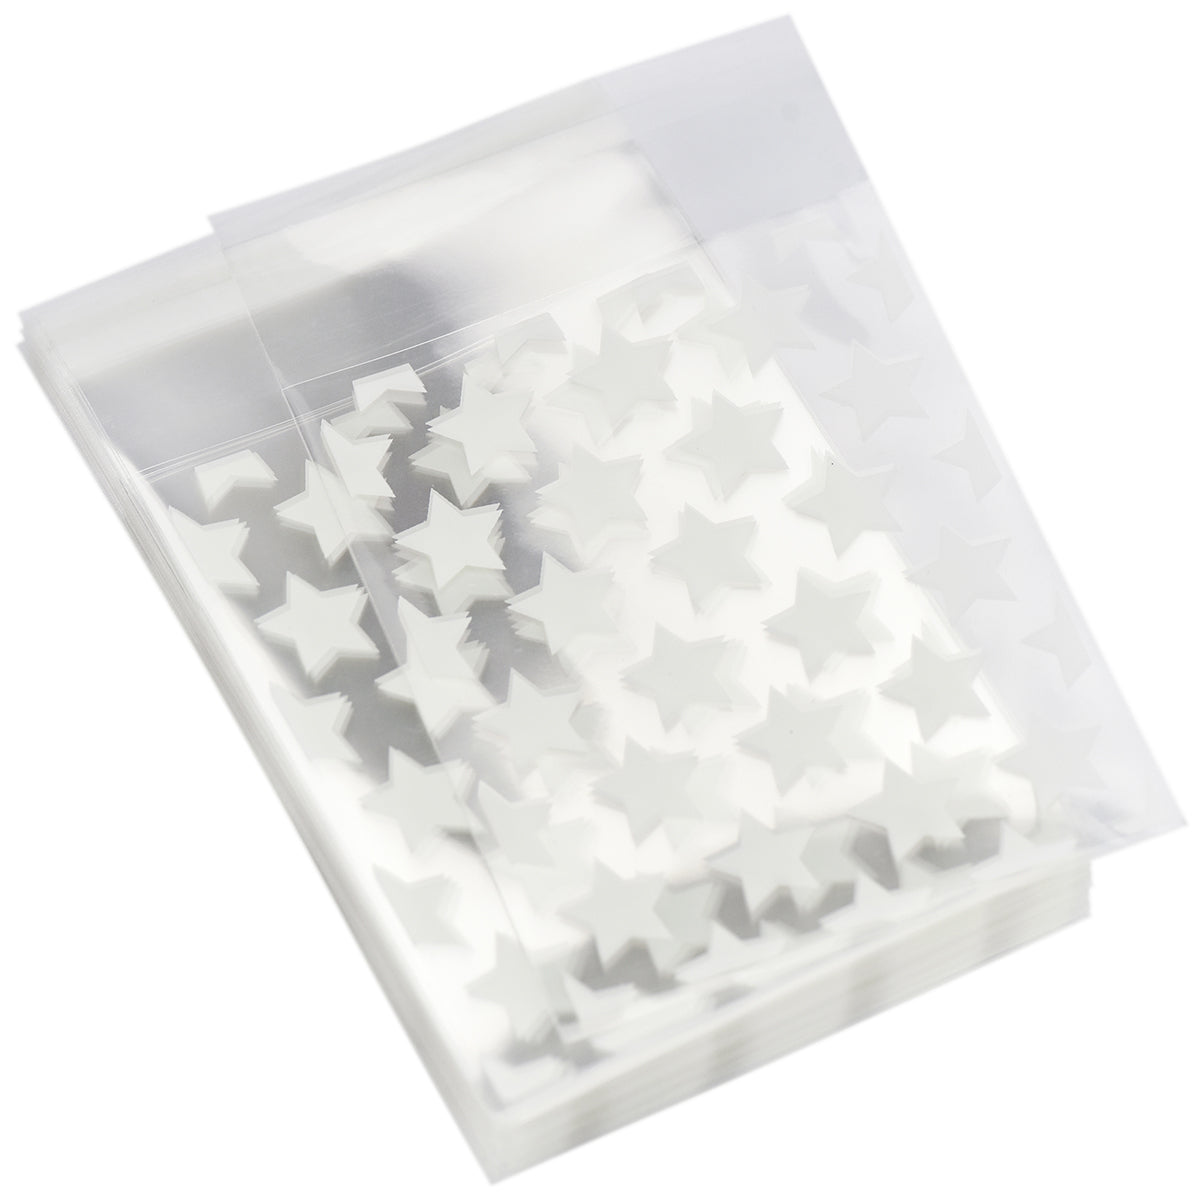 100 pieces of self-adhesive plastic bags with white stars pattern